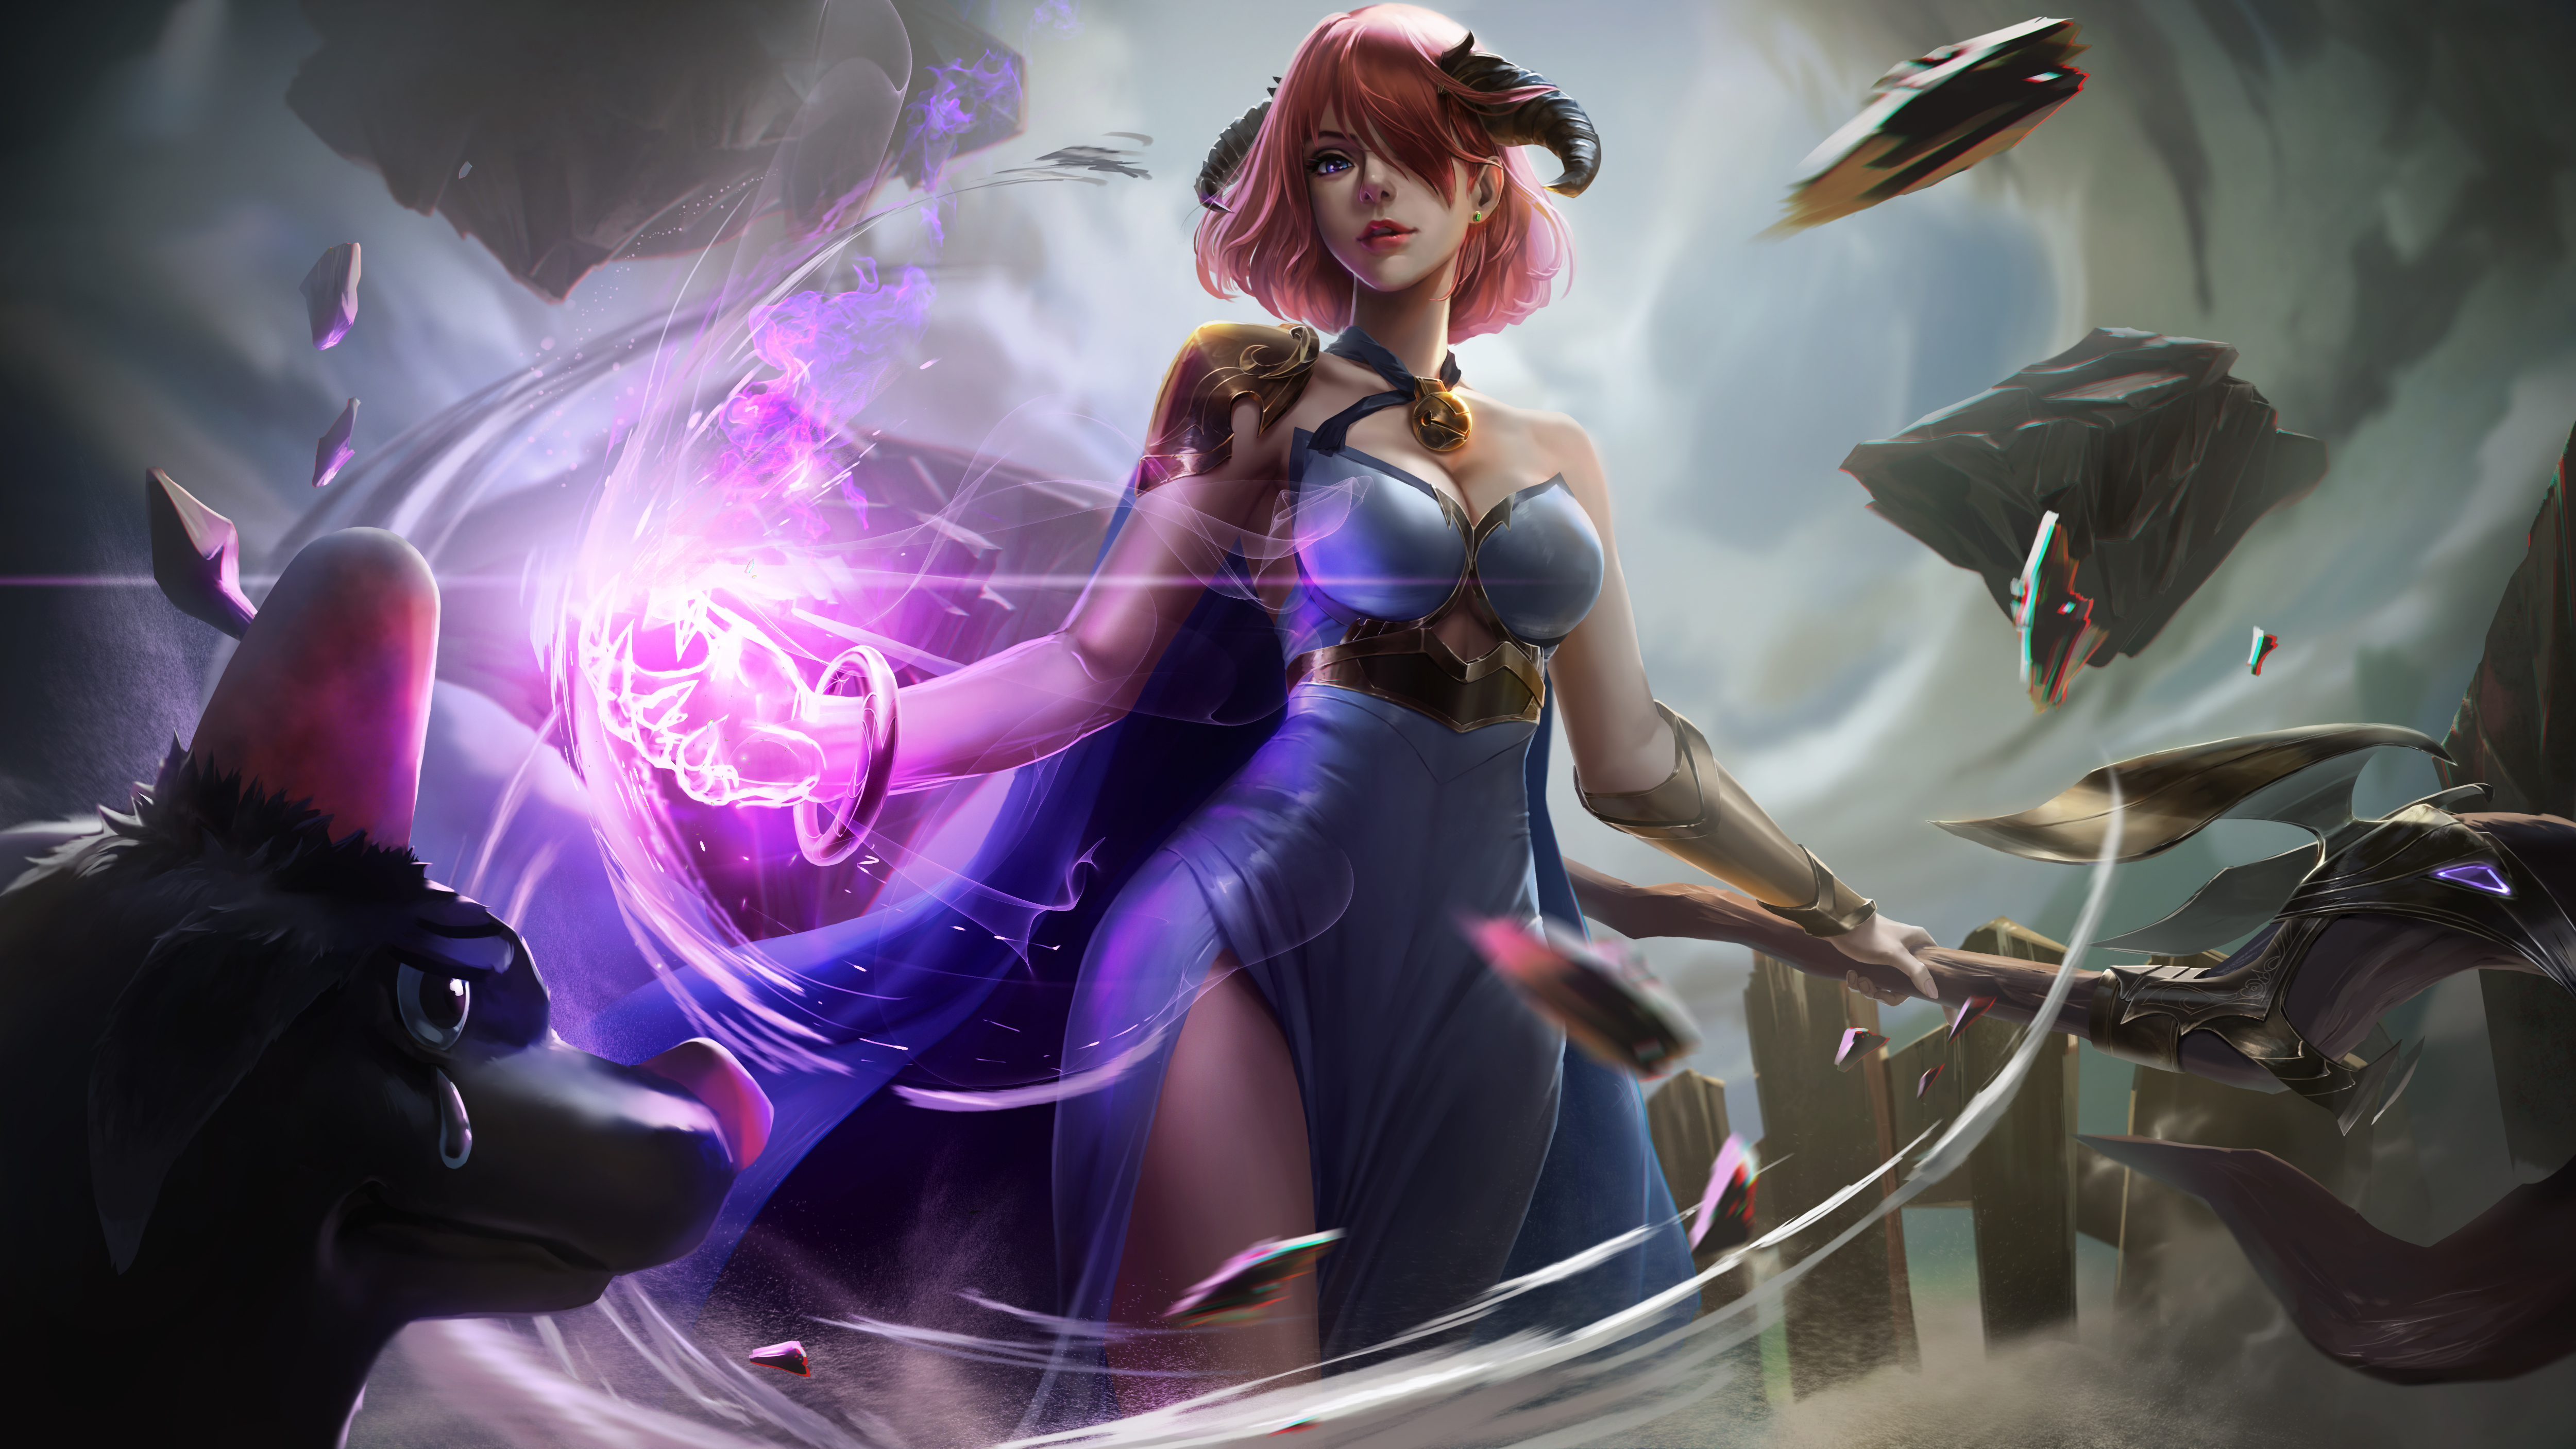 Women Fantasy Girl Pink Hair Horns Looking At Viewer Cape Armor Dress Scepters Magic Environment Dog 5000x2812